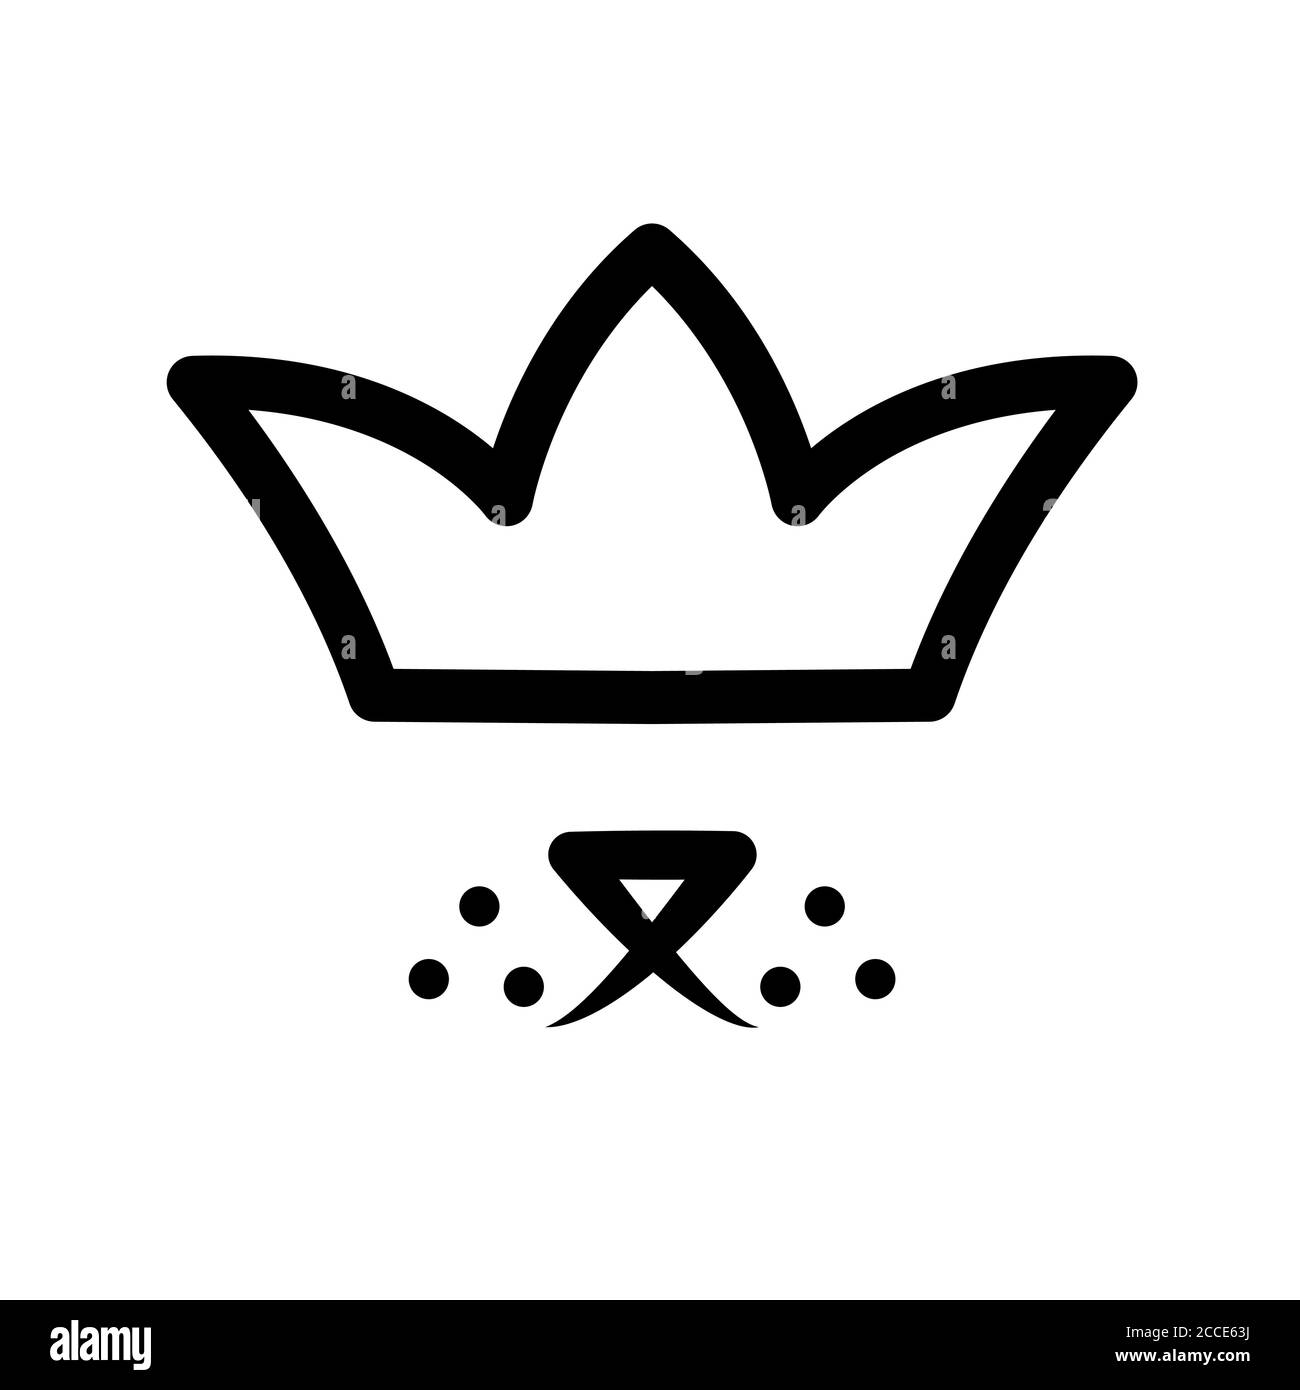 Pet in crown logo. Royal dog black sign on white background. Cute puppy happy in luxury style. Line drawing animal head king. Kingdom doggy icon element vector. Stock Vector